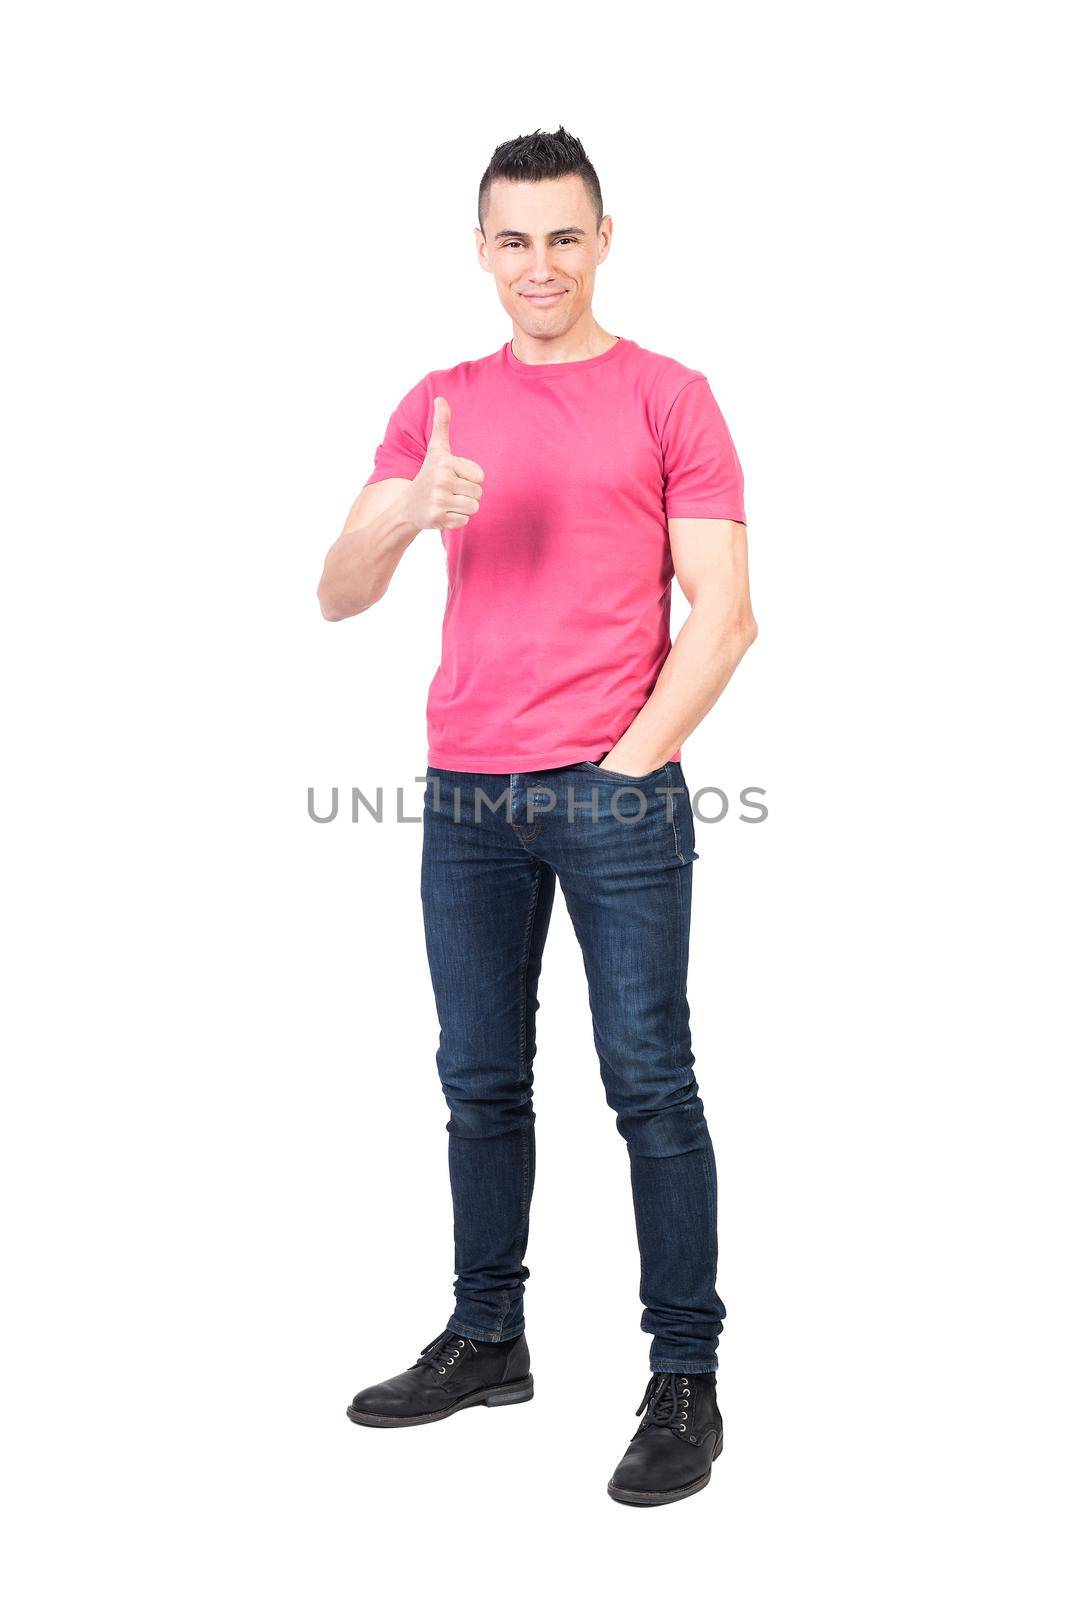 Full body of satisfied young male model with dark hair smiling and showing thumb up while standing against white background with hand in pocket and looking at camera